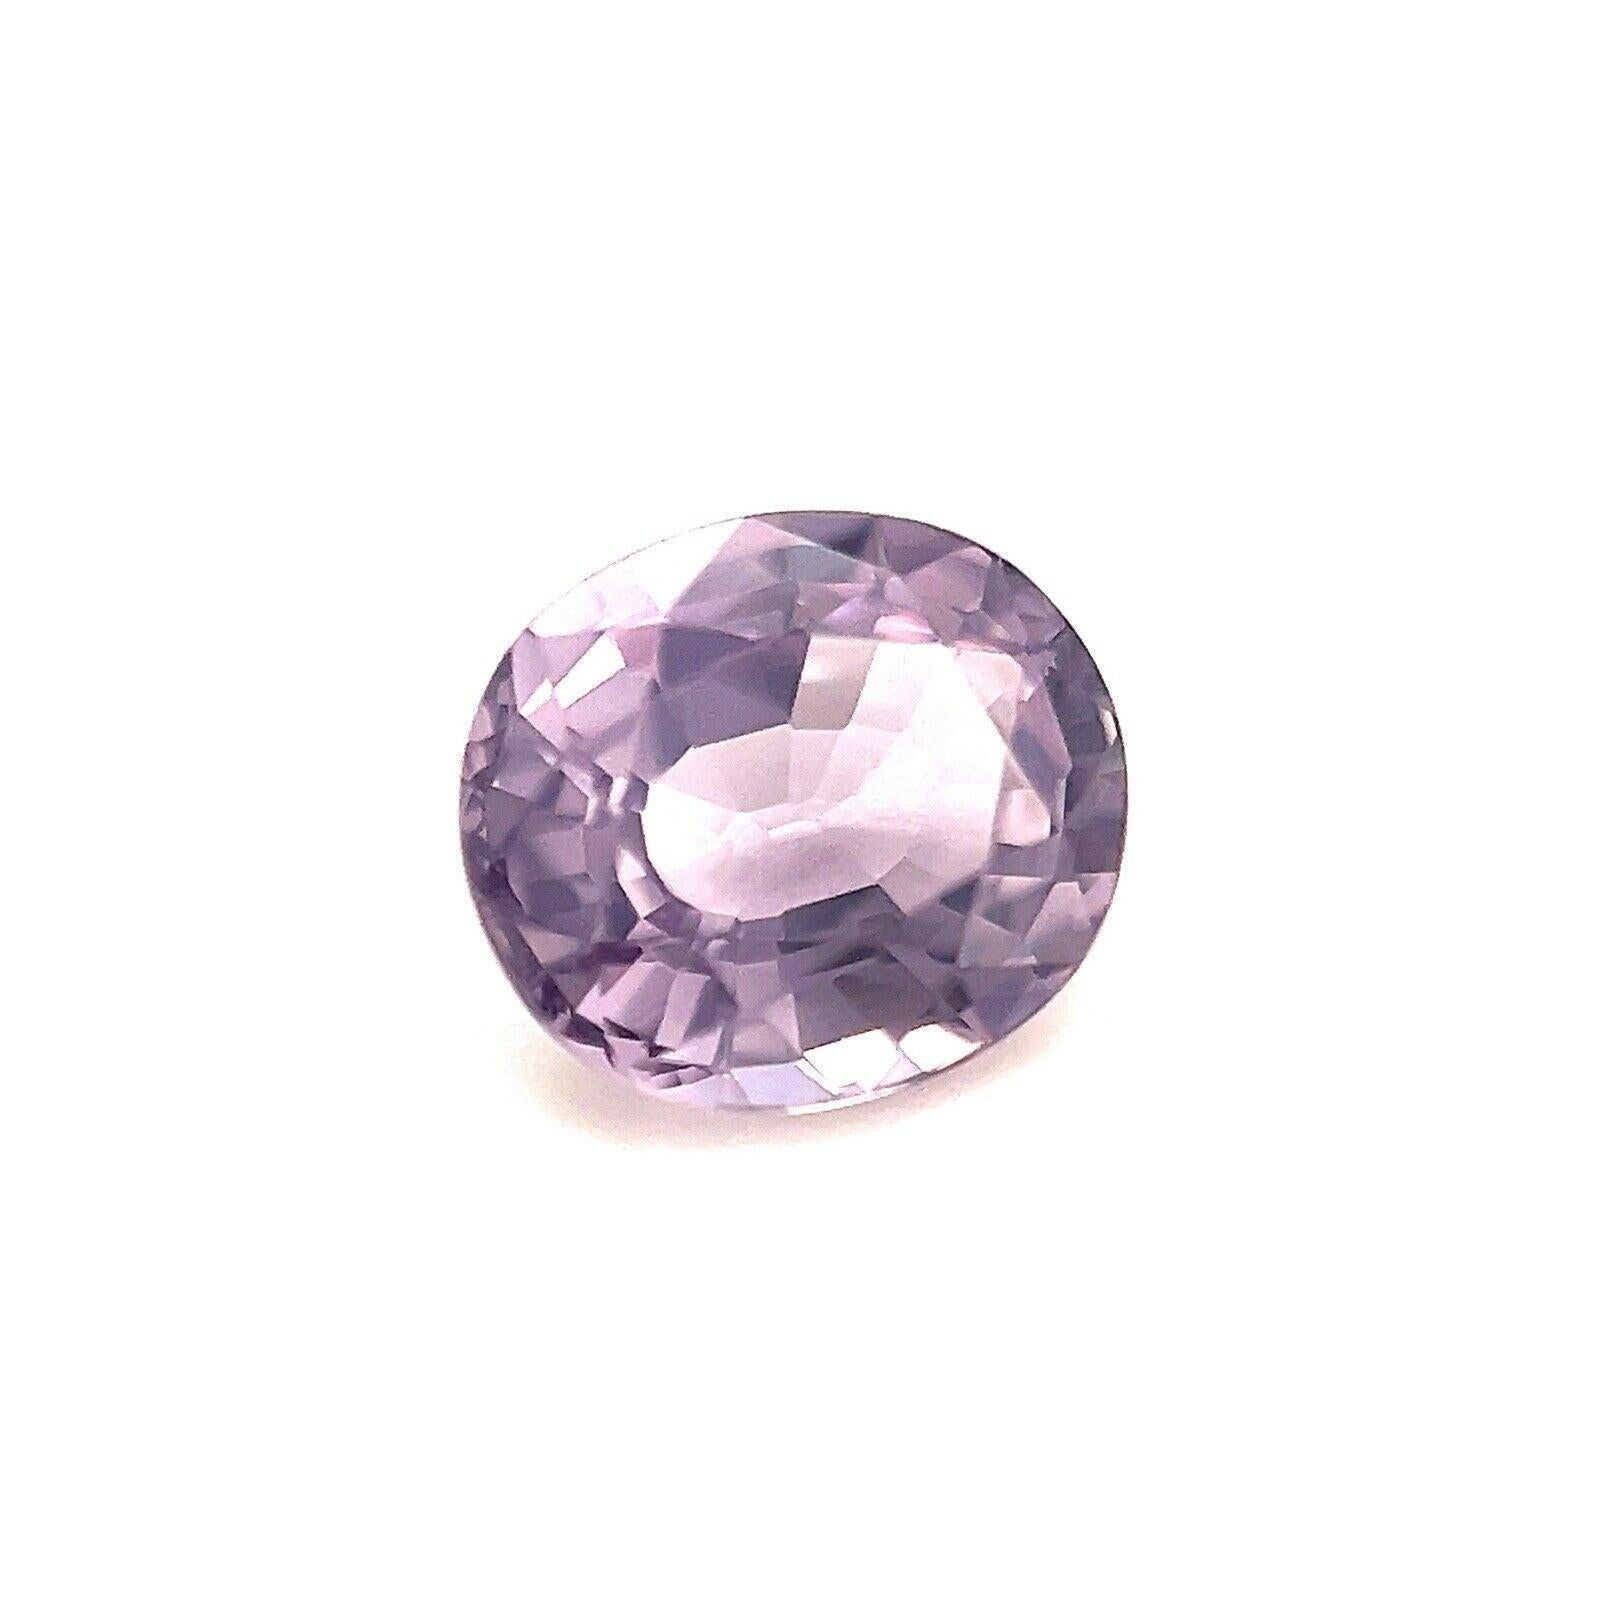 Fine Violet Purple Spinel 1.47ct Oval Cut Rare Gemstone 7.3x6.4mm Loose Gem

Fine Natural Purple Spinel Gemstone.
Rare spinel with a fine bright purple colour and excellent clarity. Totally untreated and unheated. Has an excellent oval cut measuring